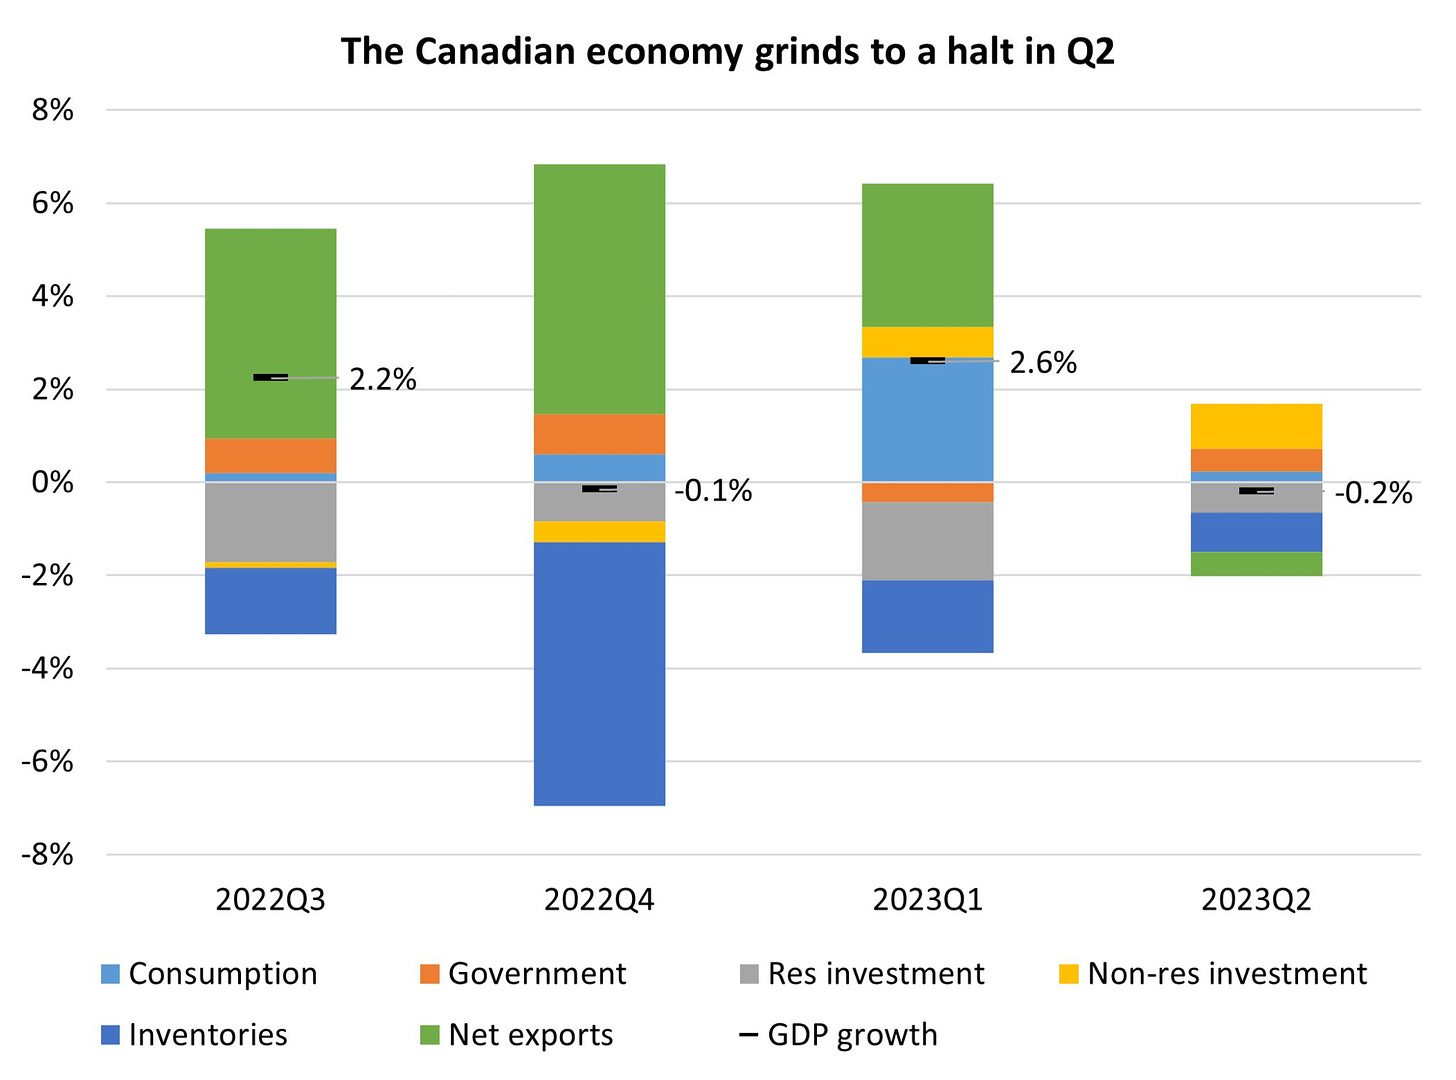 Source: Statistics Canada. Government includes both government consumption and government investment. Non-residential investment aggregates structures, machinery and equipment, intellectual property and non-profits' investment.